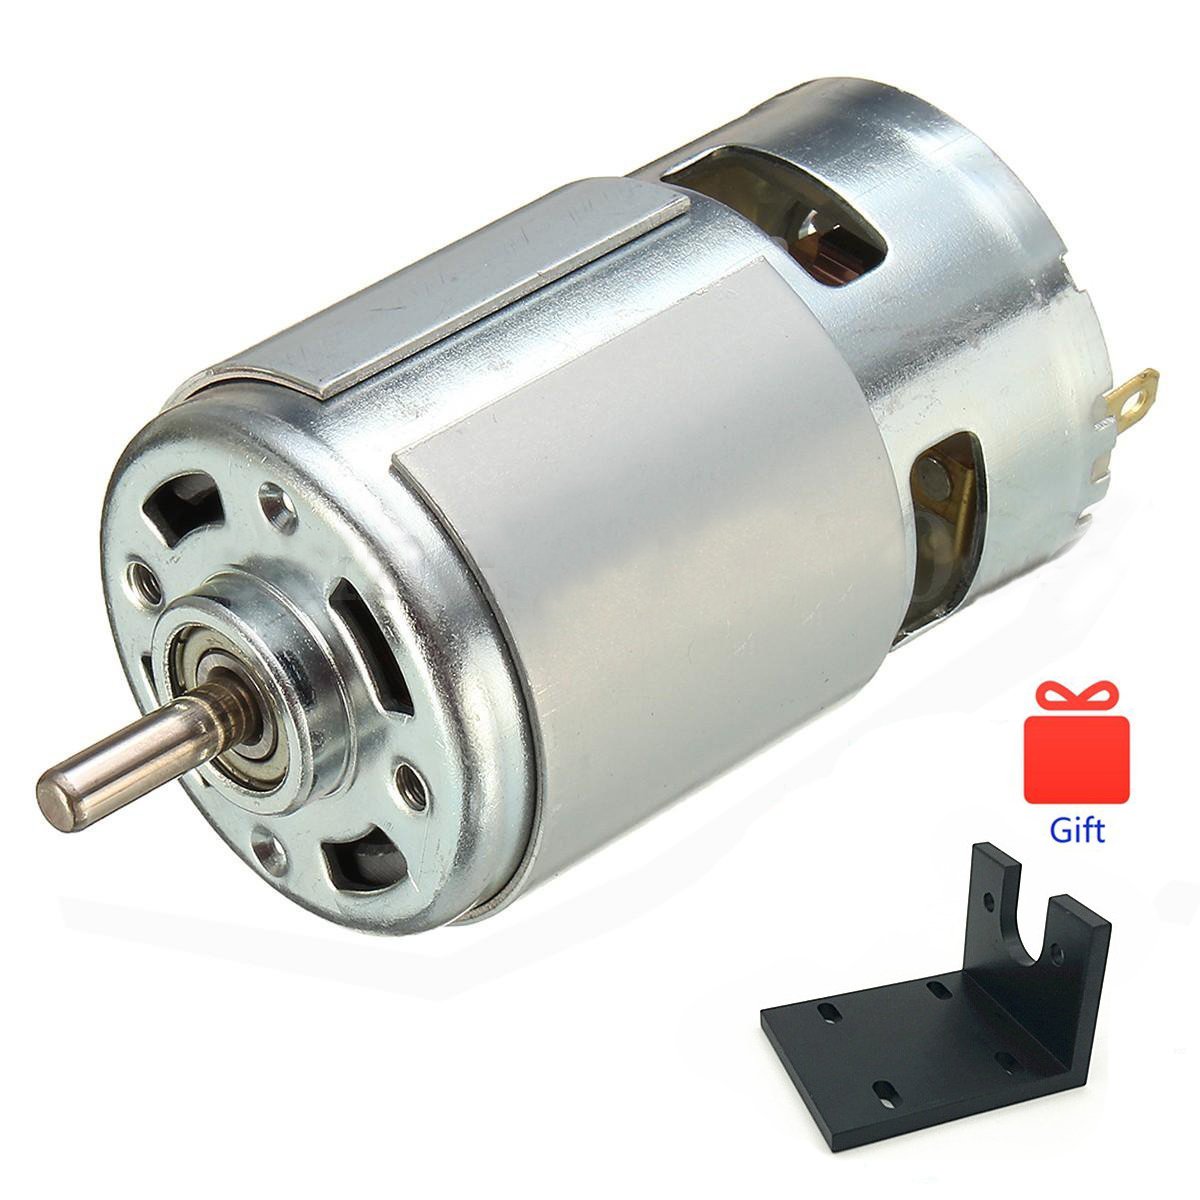 Qianson DC 775 Motor 12V-36V 24V 3500-9000RPM 775 Motor Ball Bearing Large Torque High Power Low Noise DC Motor for Electrical Tools